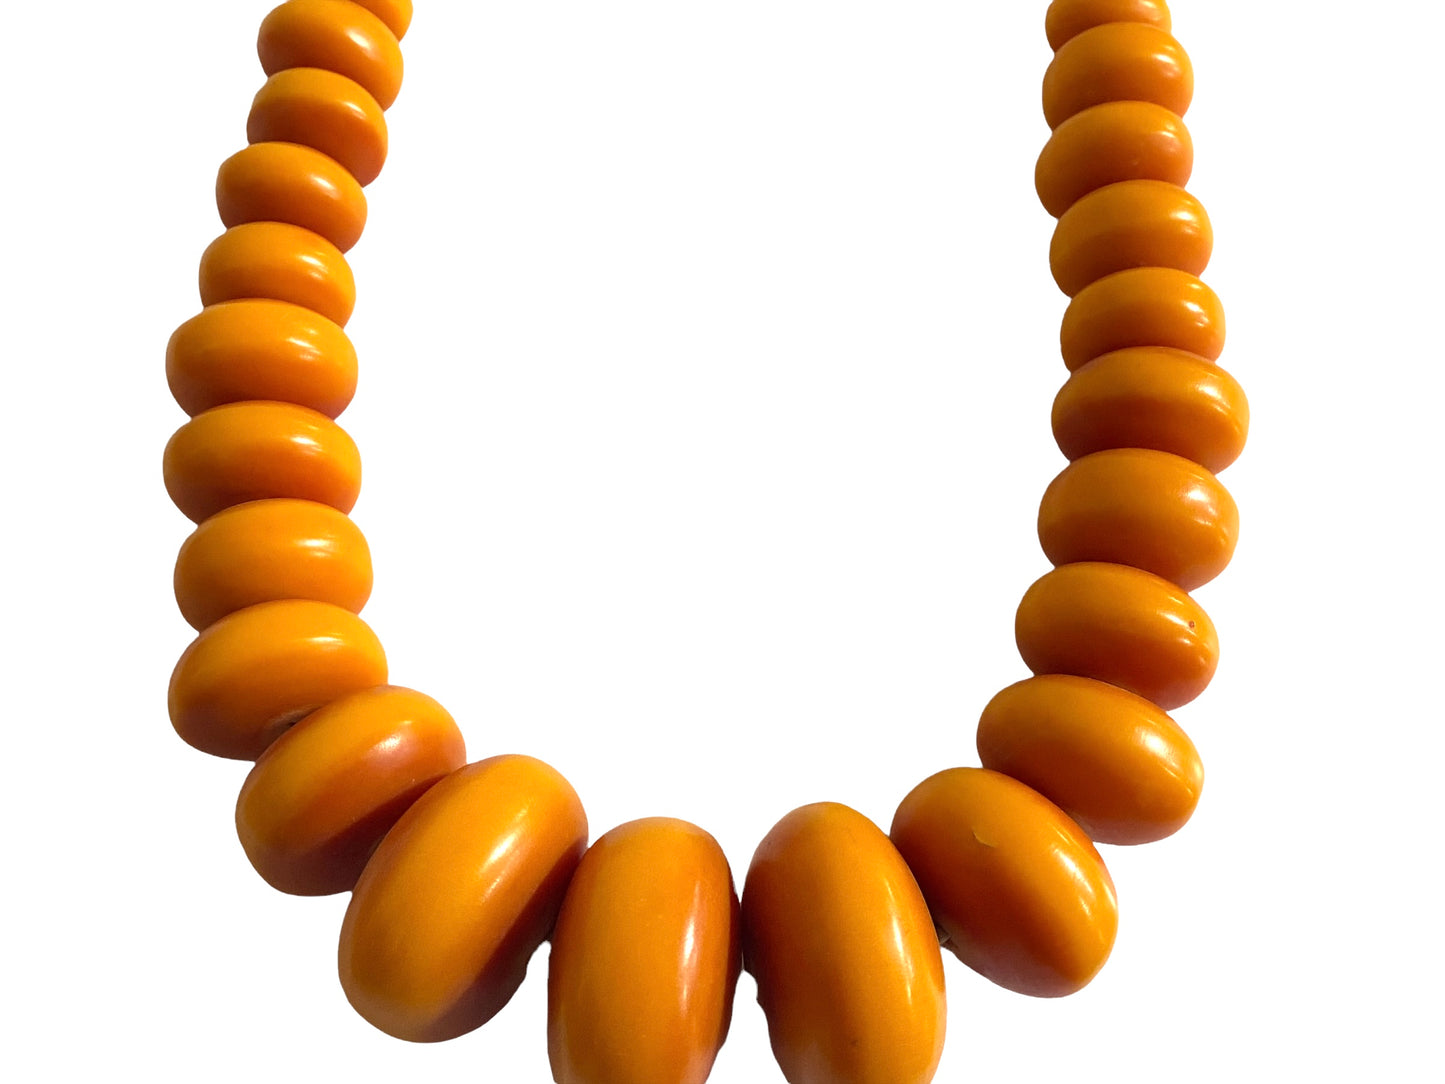 #4554 Superb LG Vtg African Simulated Amber Necklace w/ 71 trade beads